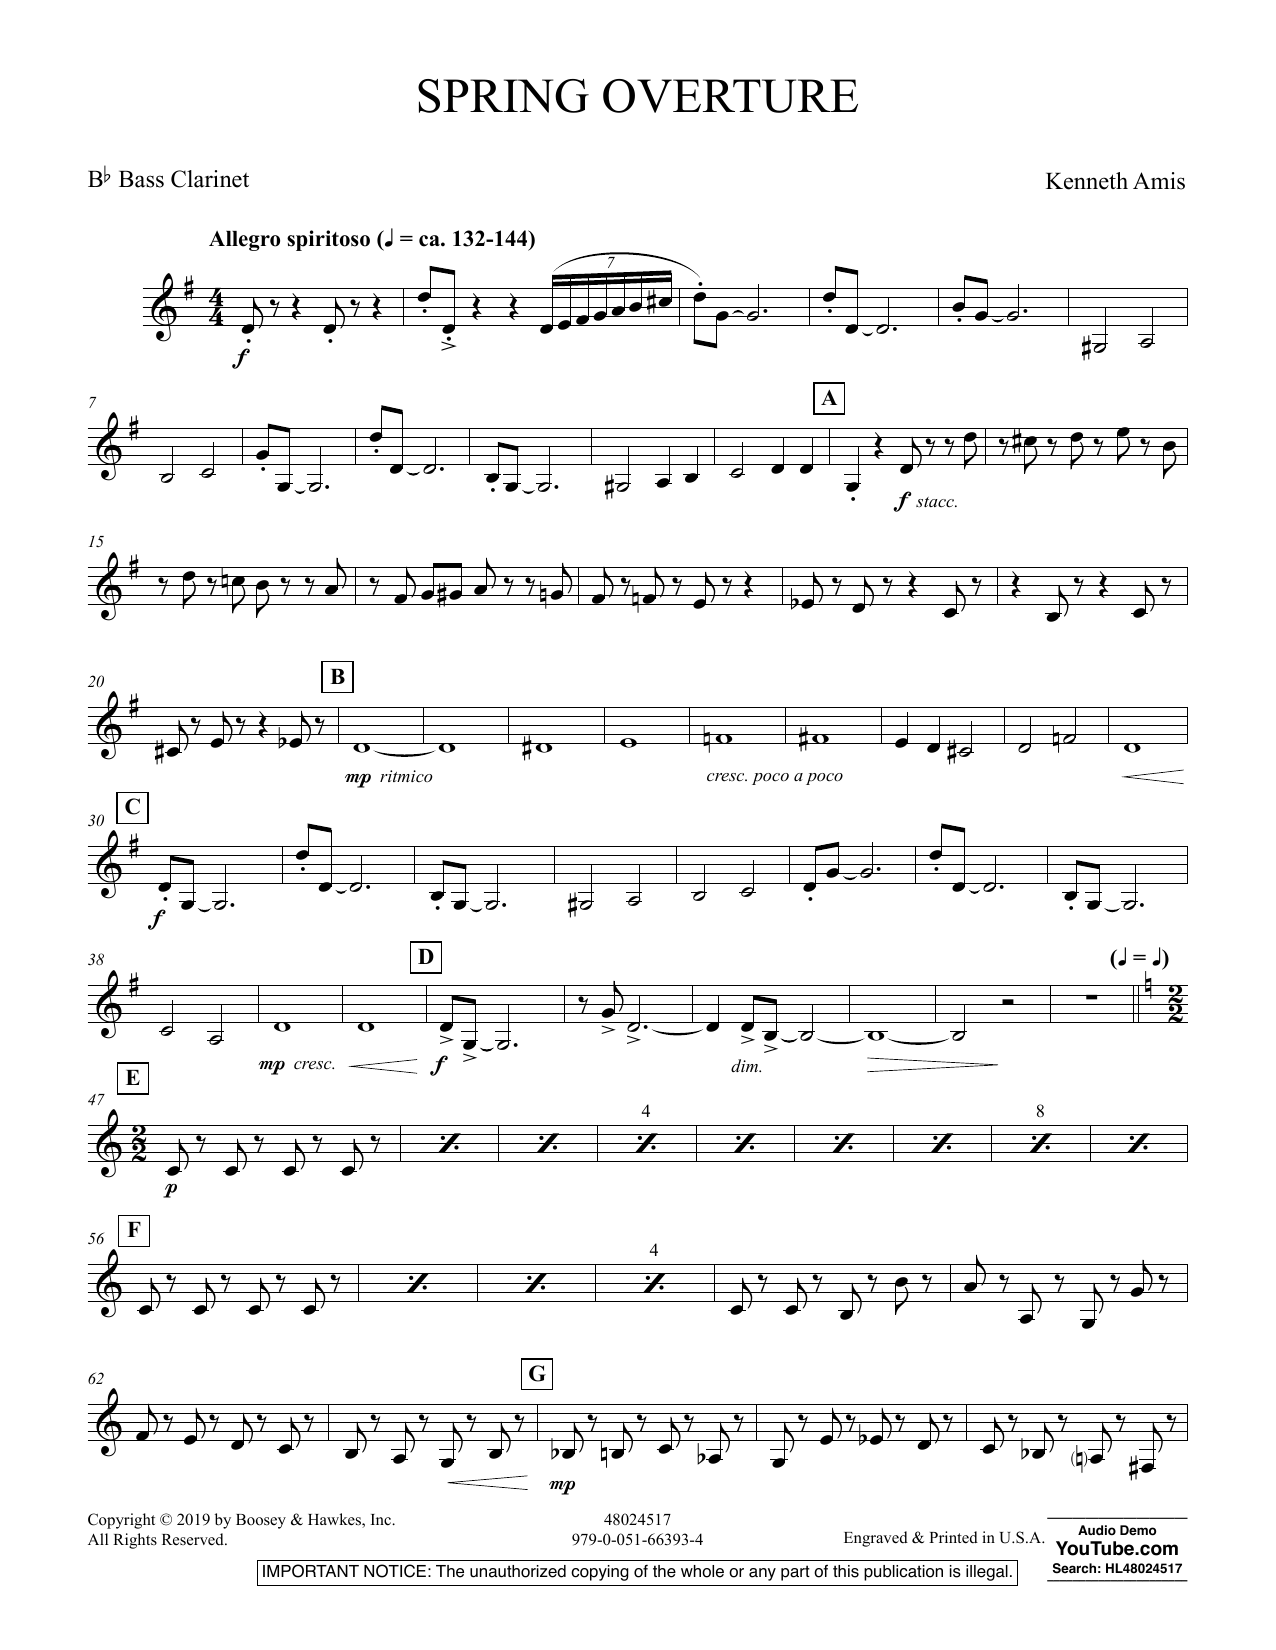 Kenneth Amis Spring Overture - Bb Bass Clarinet sheet music preview music notes and score for Concert Band including 3 page(s)